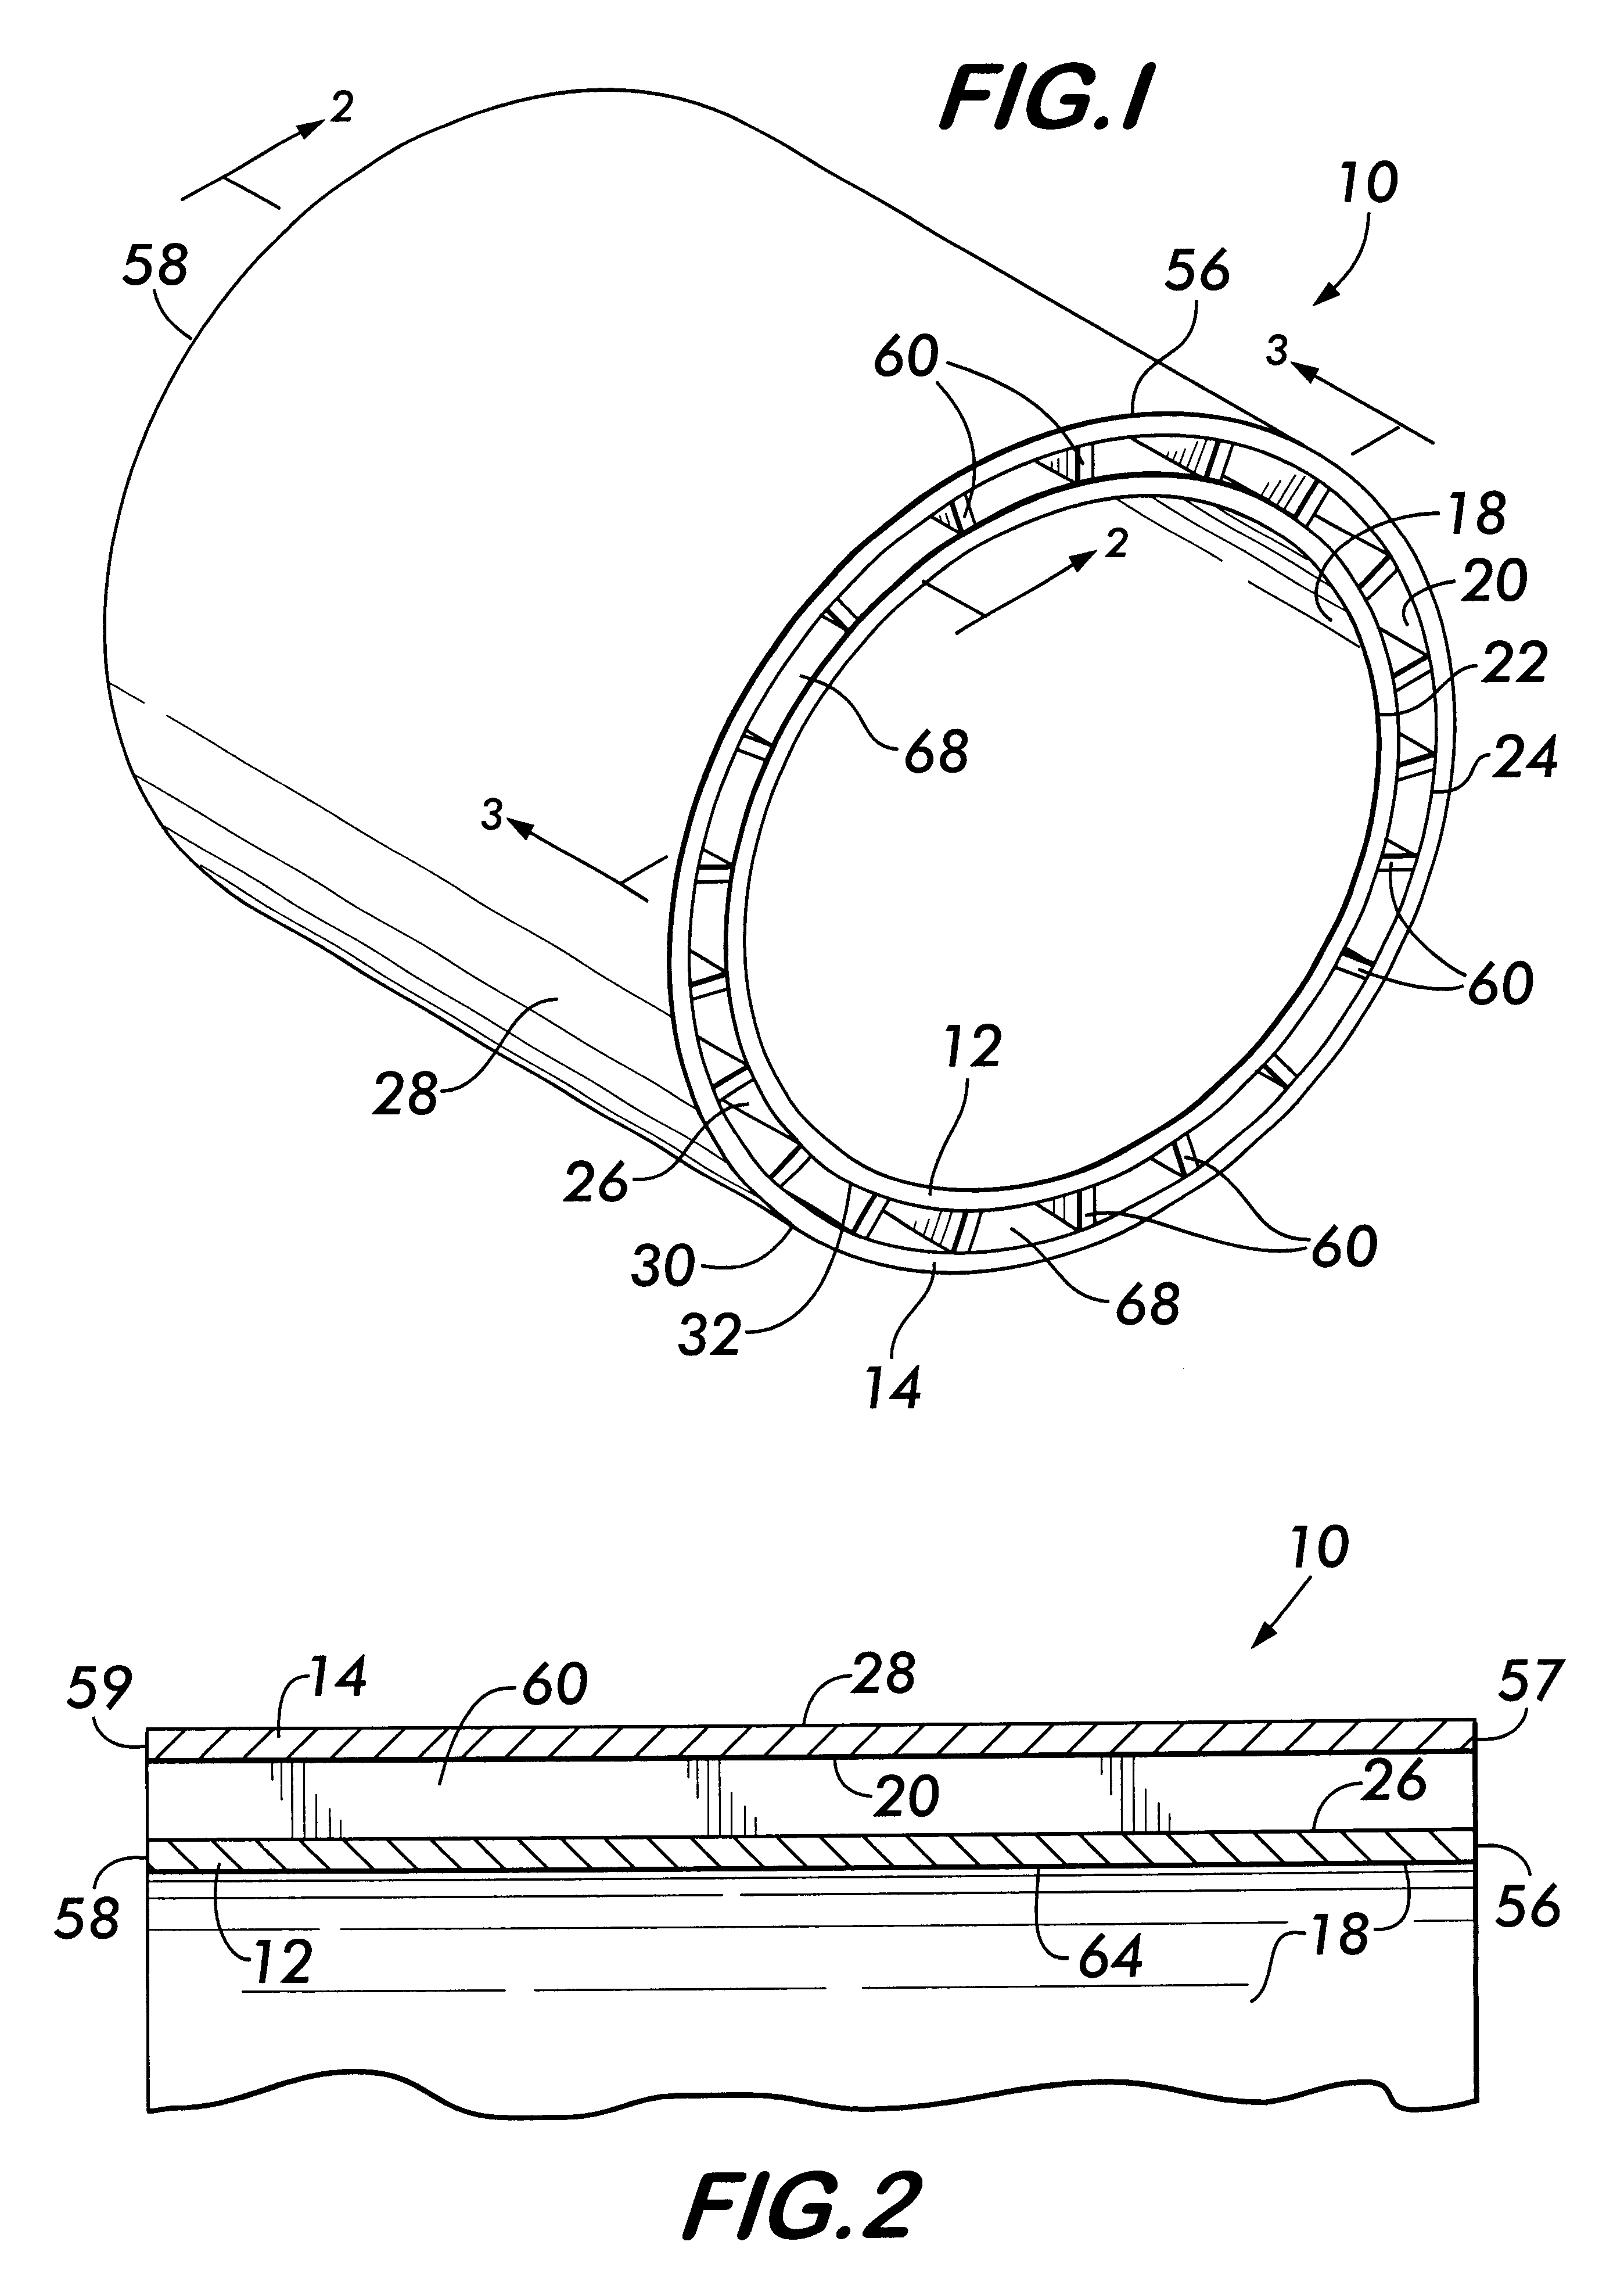 Deforming charge assembly and method of making same